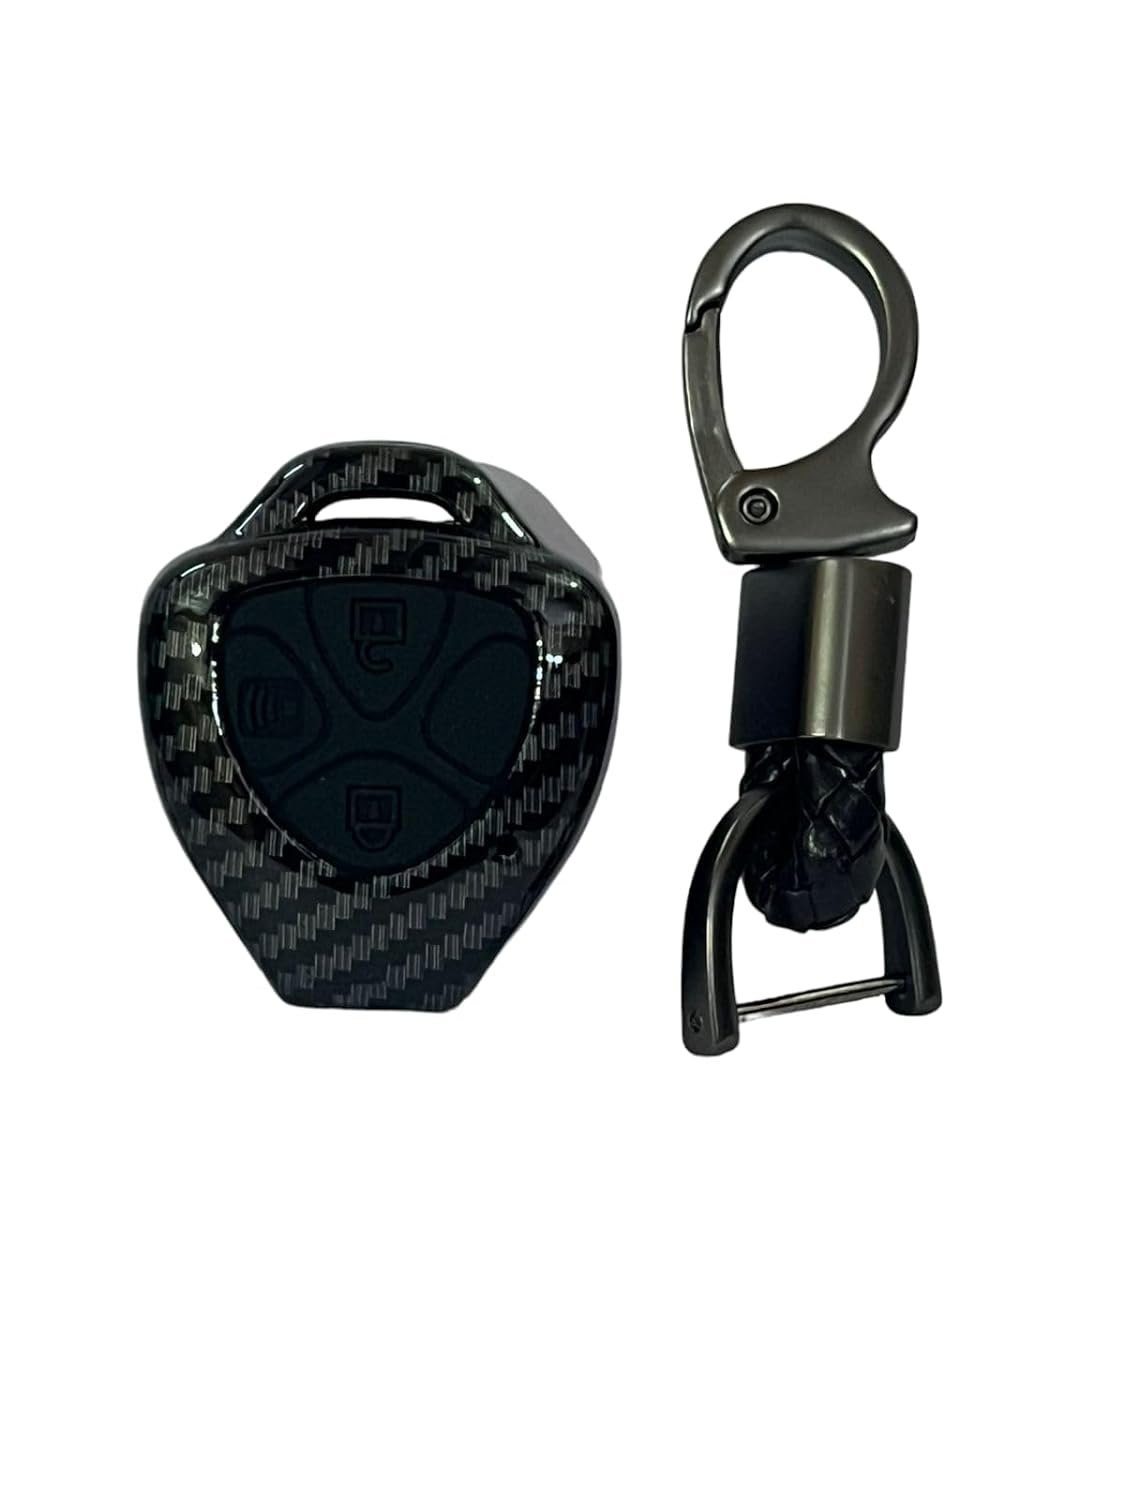 Carbon Fiber ABS Remote Key Cover Compatible with Toyota Fortuner, Innova, Camry 4/3 Buttons (Key Chain Included) Image 